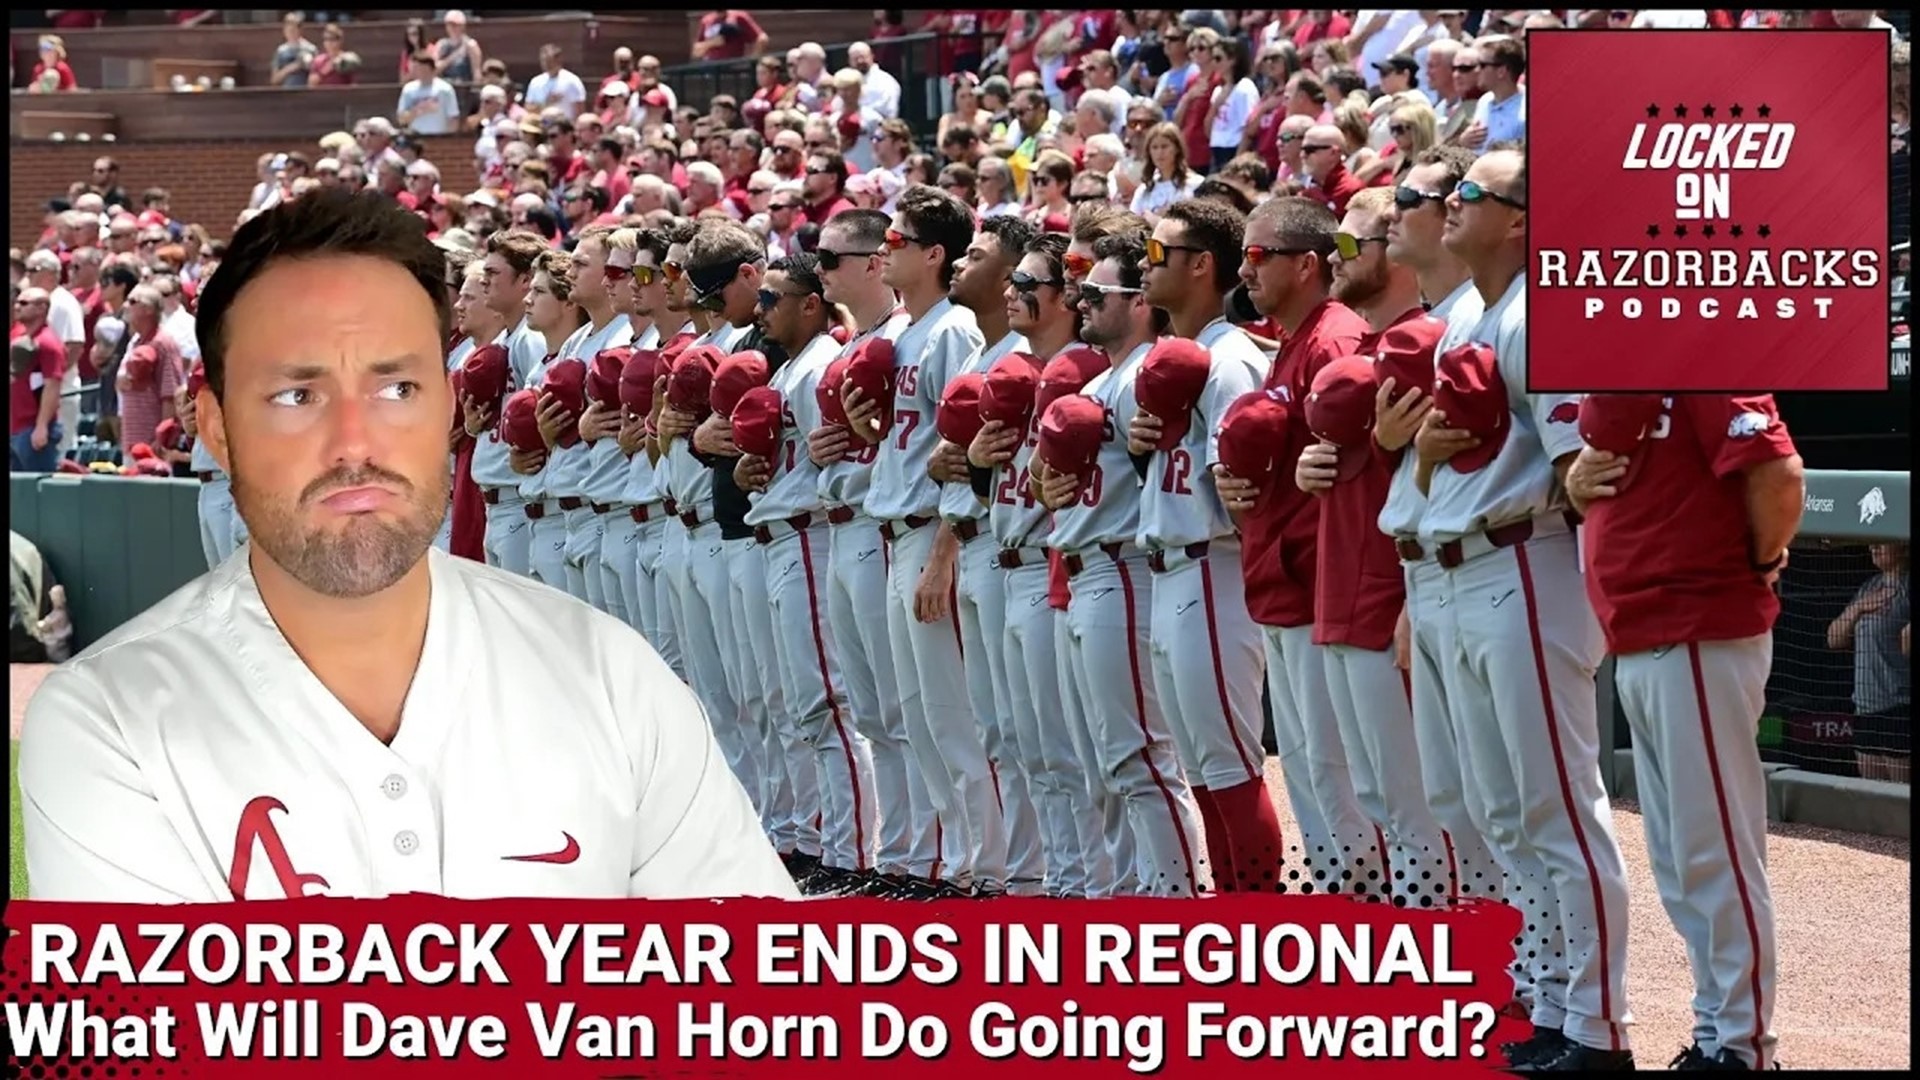 Razorback Baseball had their season cut short after they lose to TCU in dominating fashion up in Fayetteville over the weekend. How will this season be remembered?